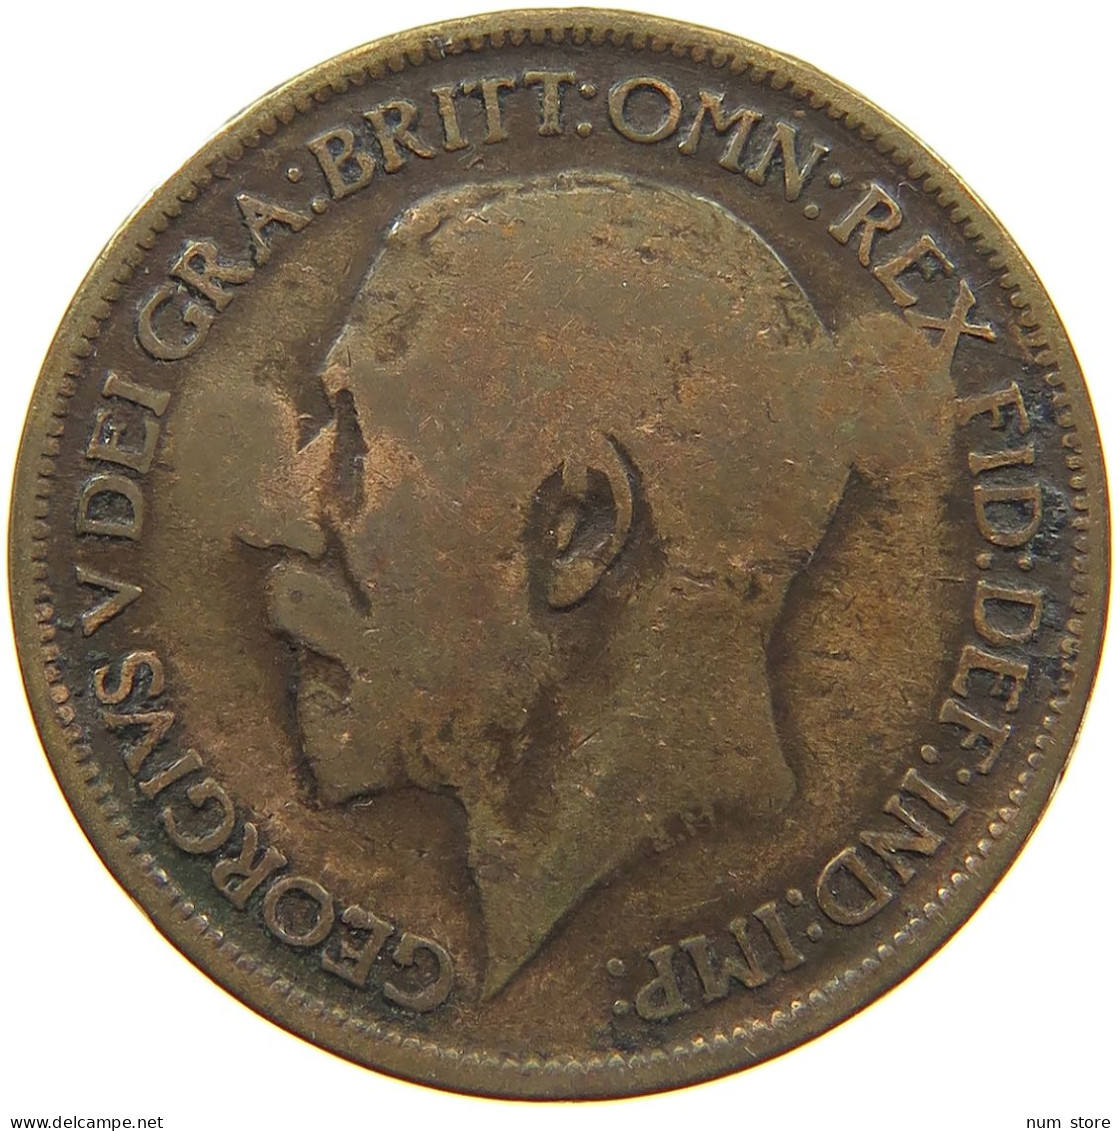 GREAT BRITAIN HALFPENNY 1917 George V. (1910-1936) GH COUNTERMARKED #c034 0001 - C. 1/2 Penny